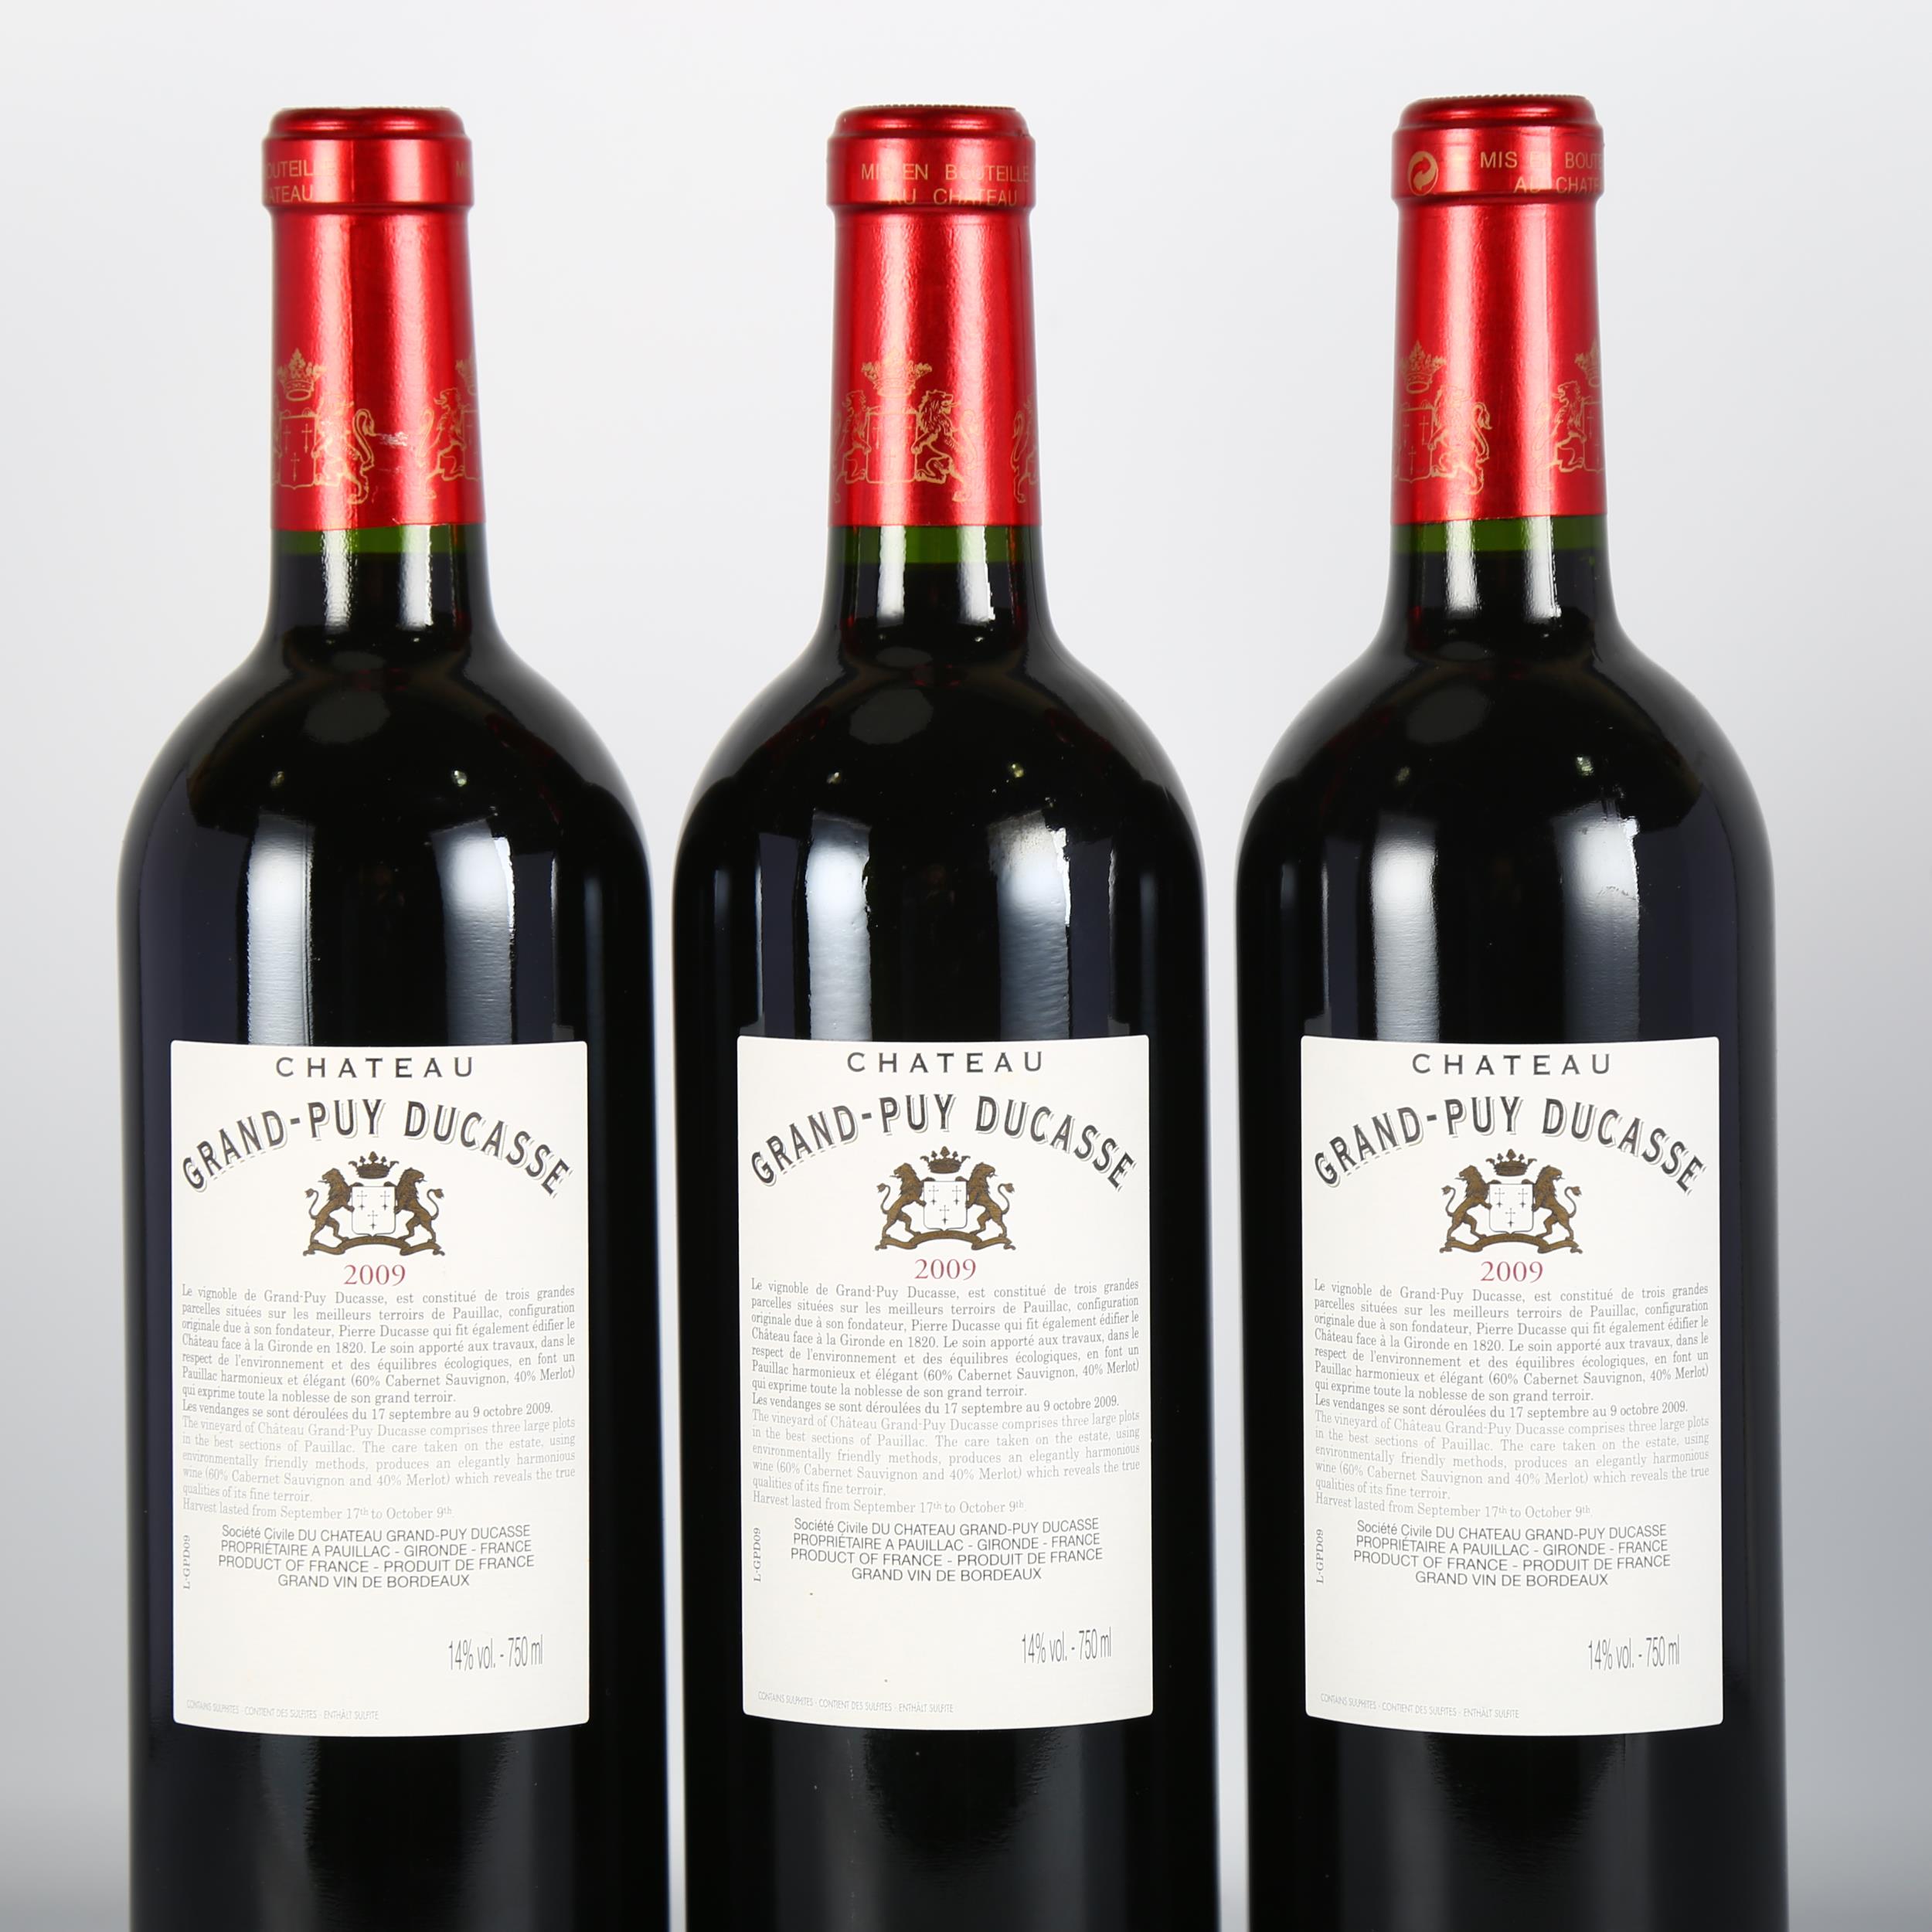 Chateau Grand-Puy Ducasse 2009, Pauillac x 3 bottles. 93 points Wine Spectator. 17 points Jancis - Image 3 of 3